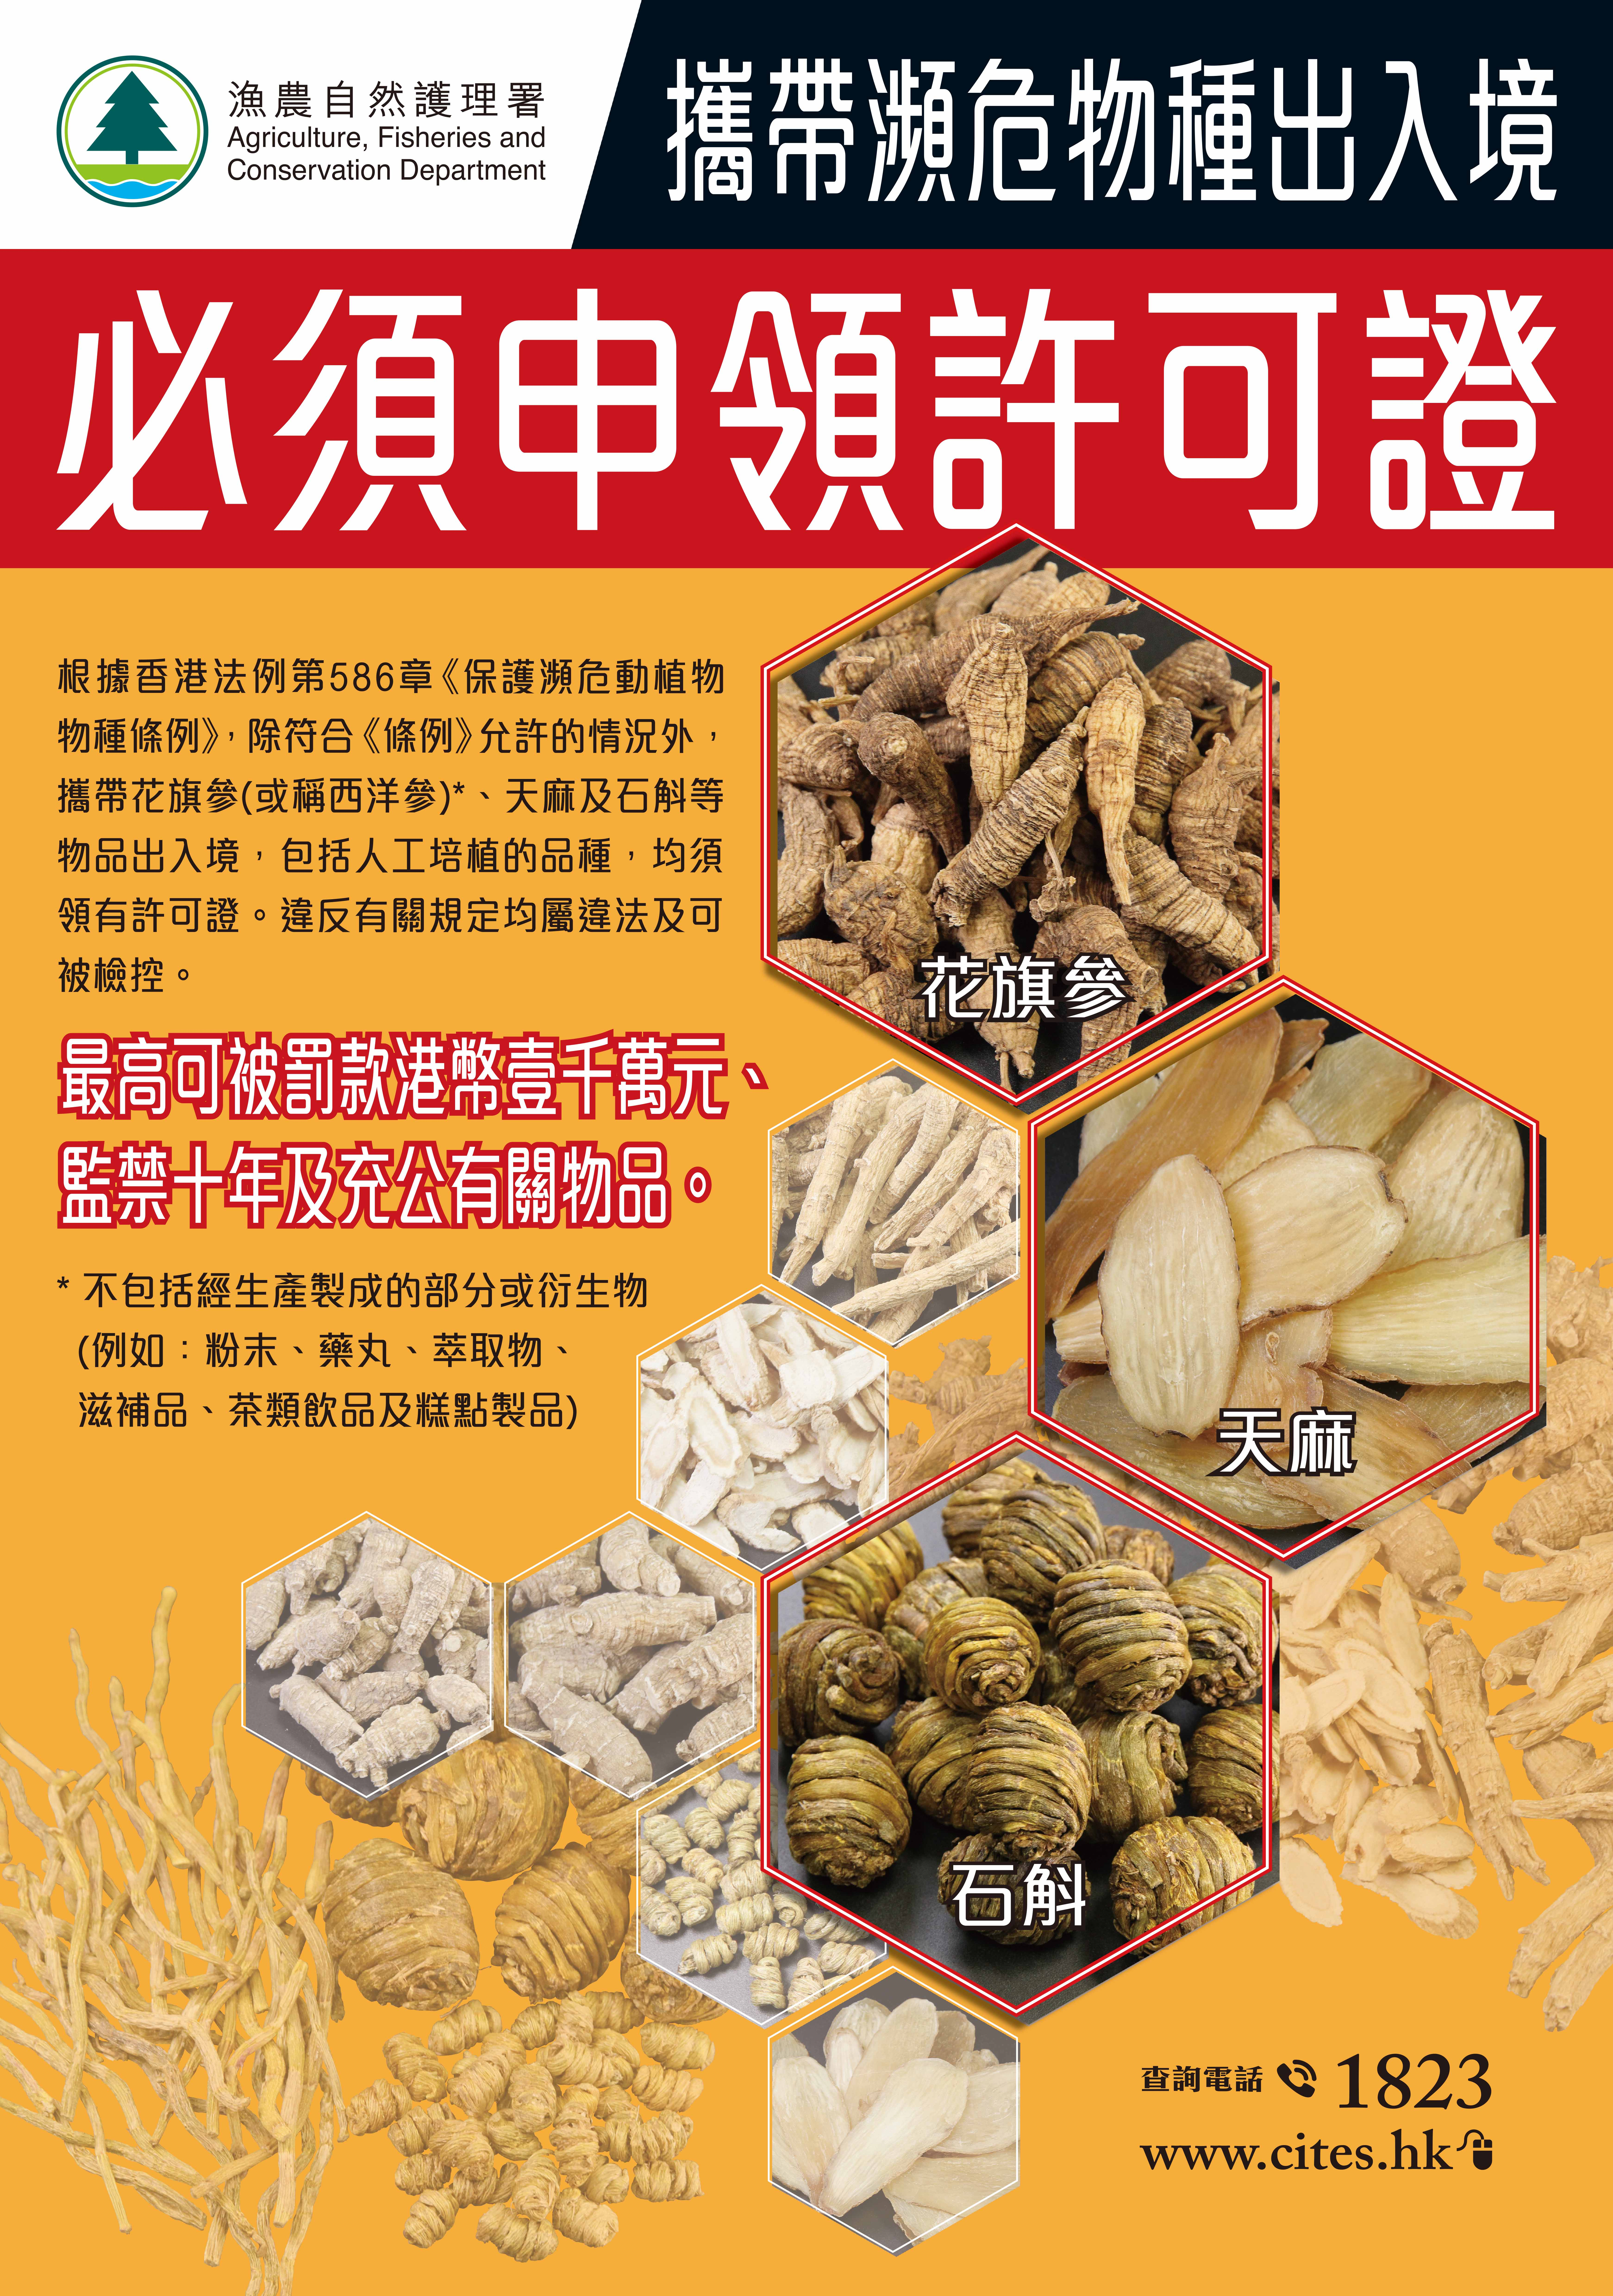 Pamphlets - Gastrodia, Dendrobium and American Ginseng